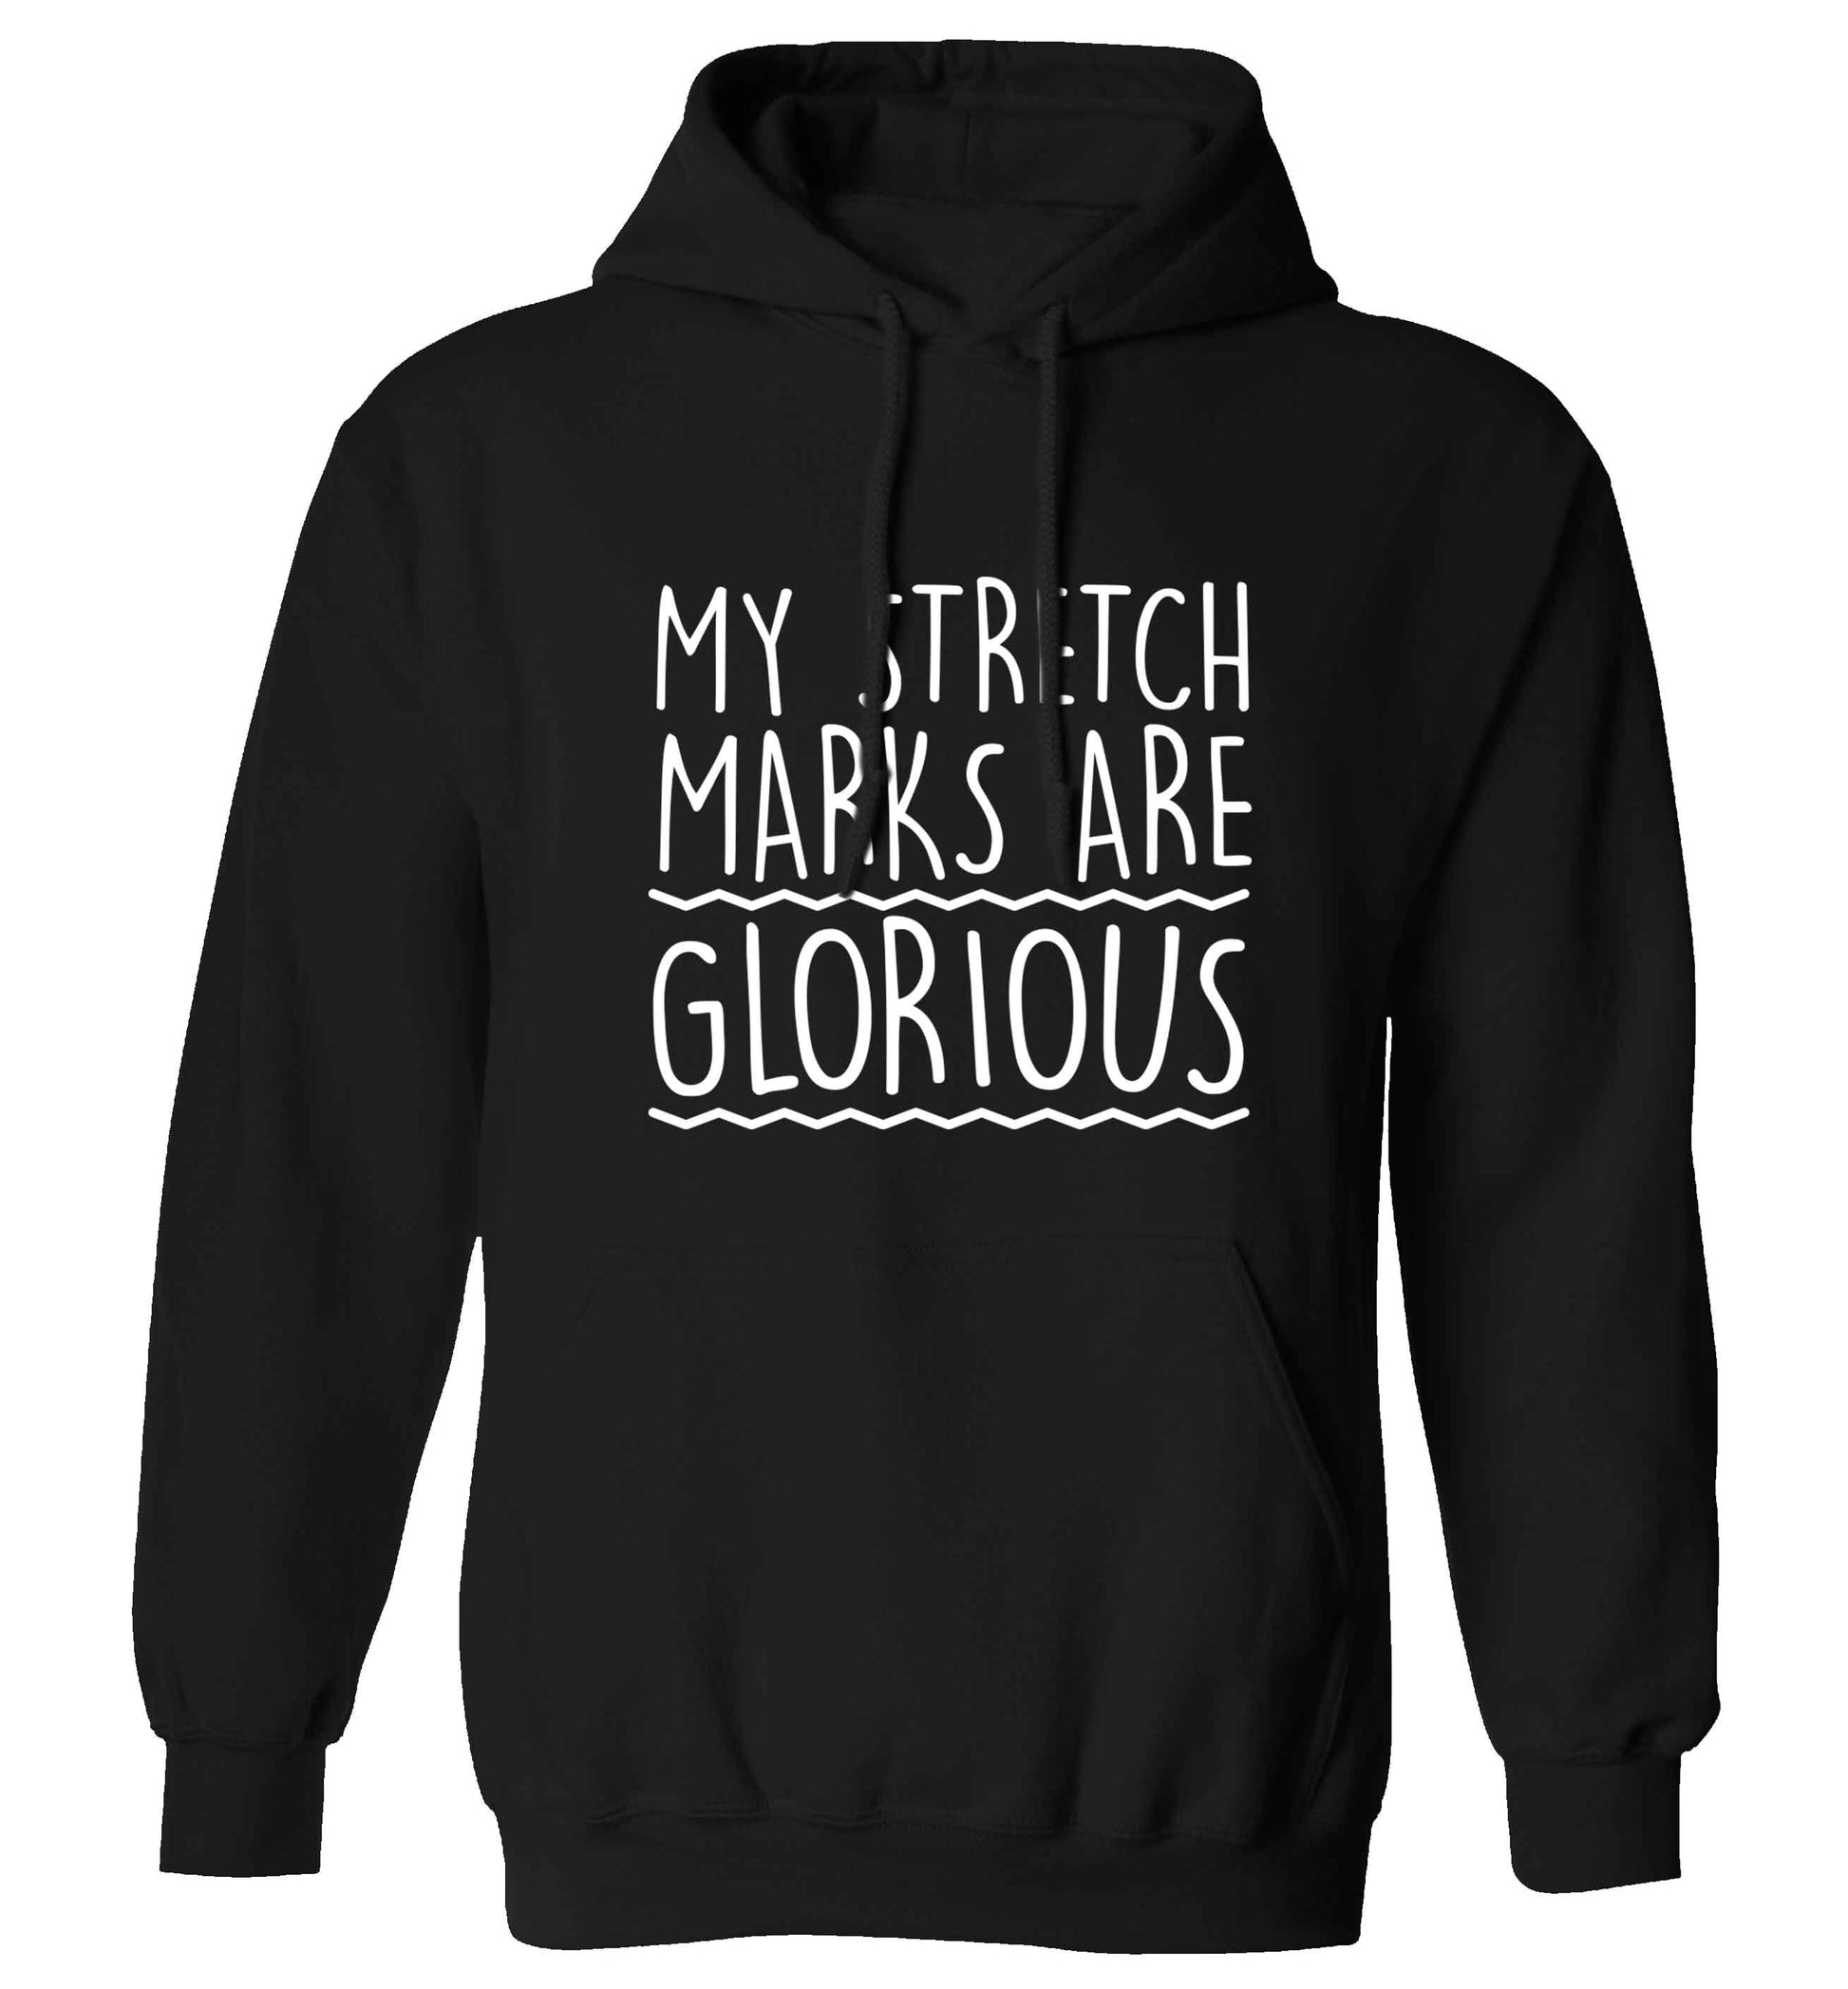 My stretch marks are glorious adults unisex black hoodie 2XL